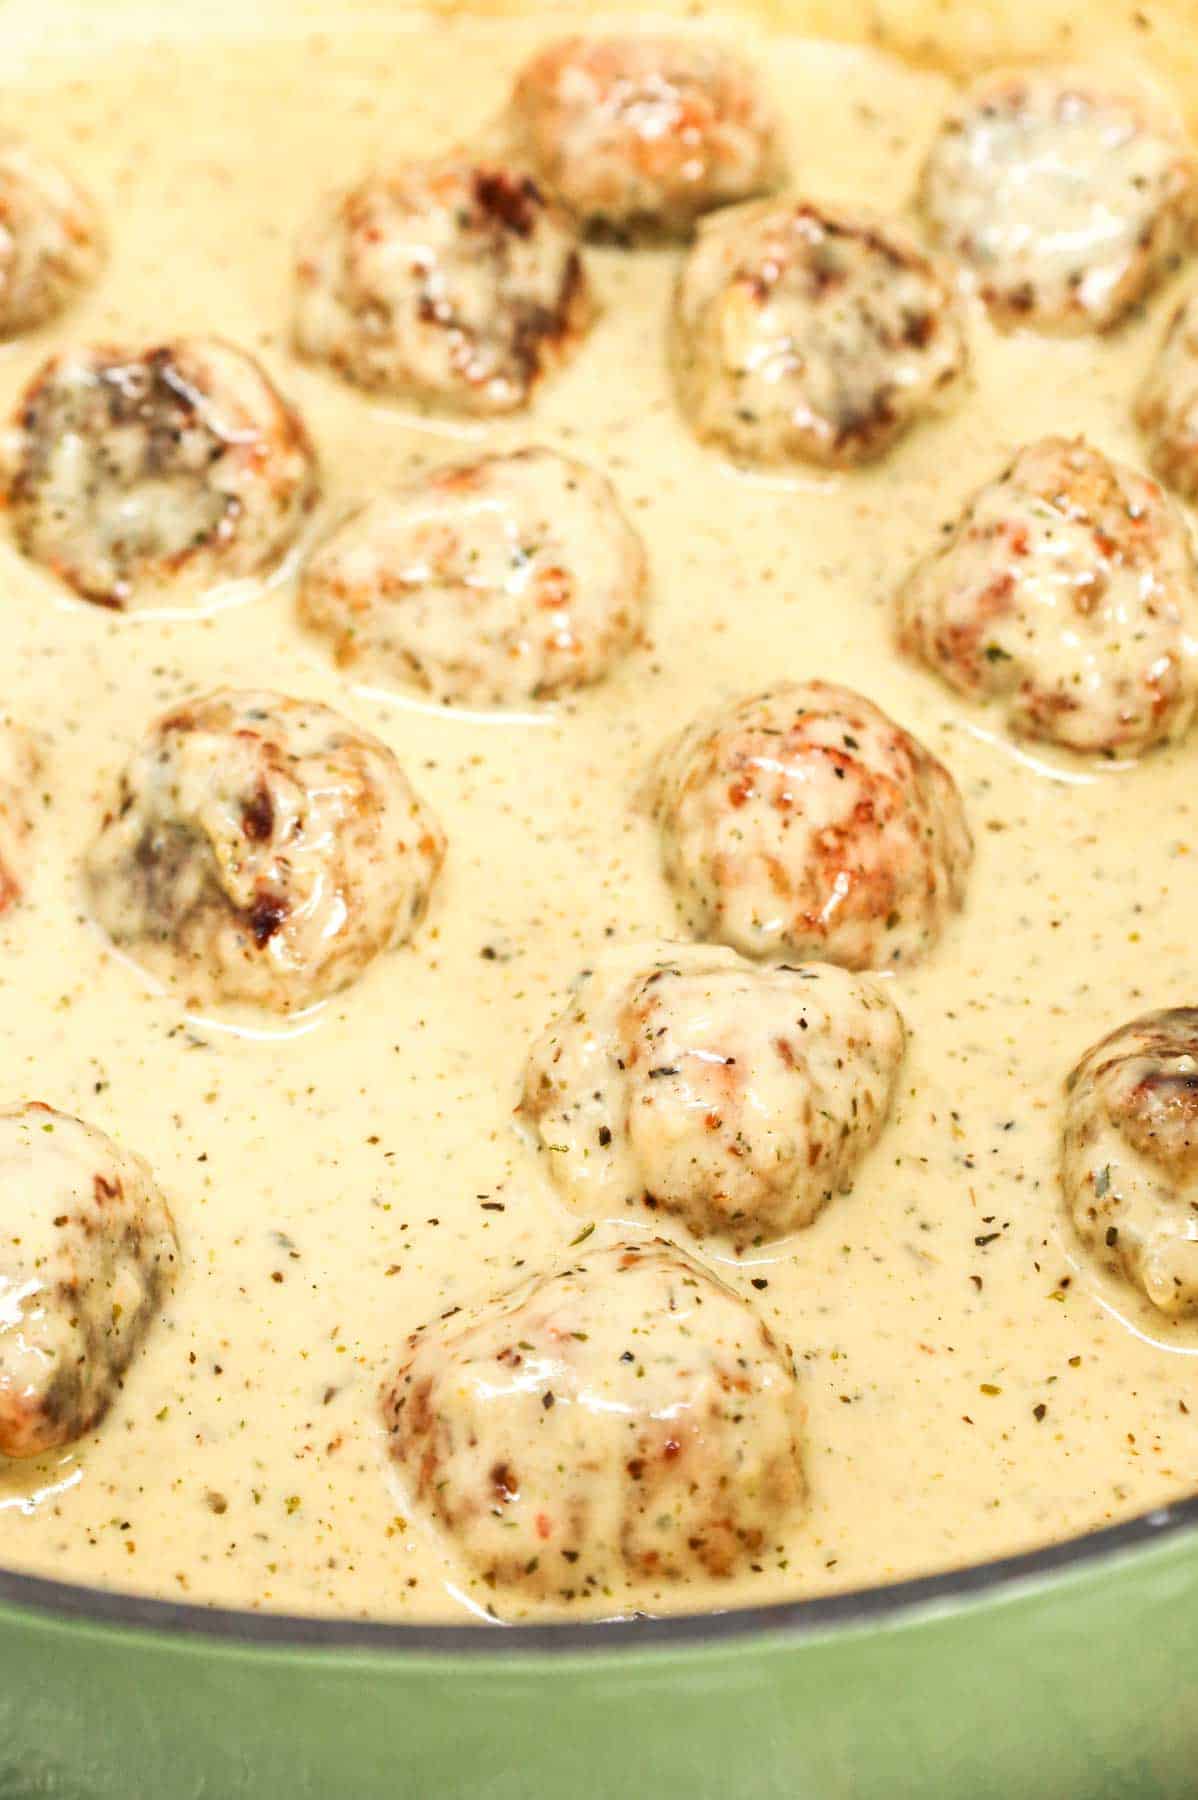 Alfredo Meatballs are an easy ground chicken meatball recipe loaded with Italian seasoned bread crumbs, garlic powder and parmesan cheese and tossed in a rich and creamy alfredo sauce.